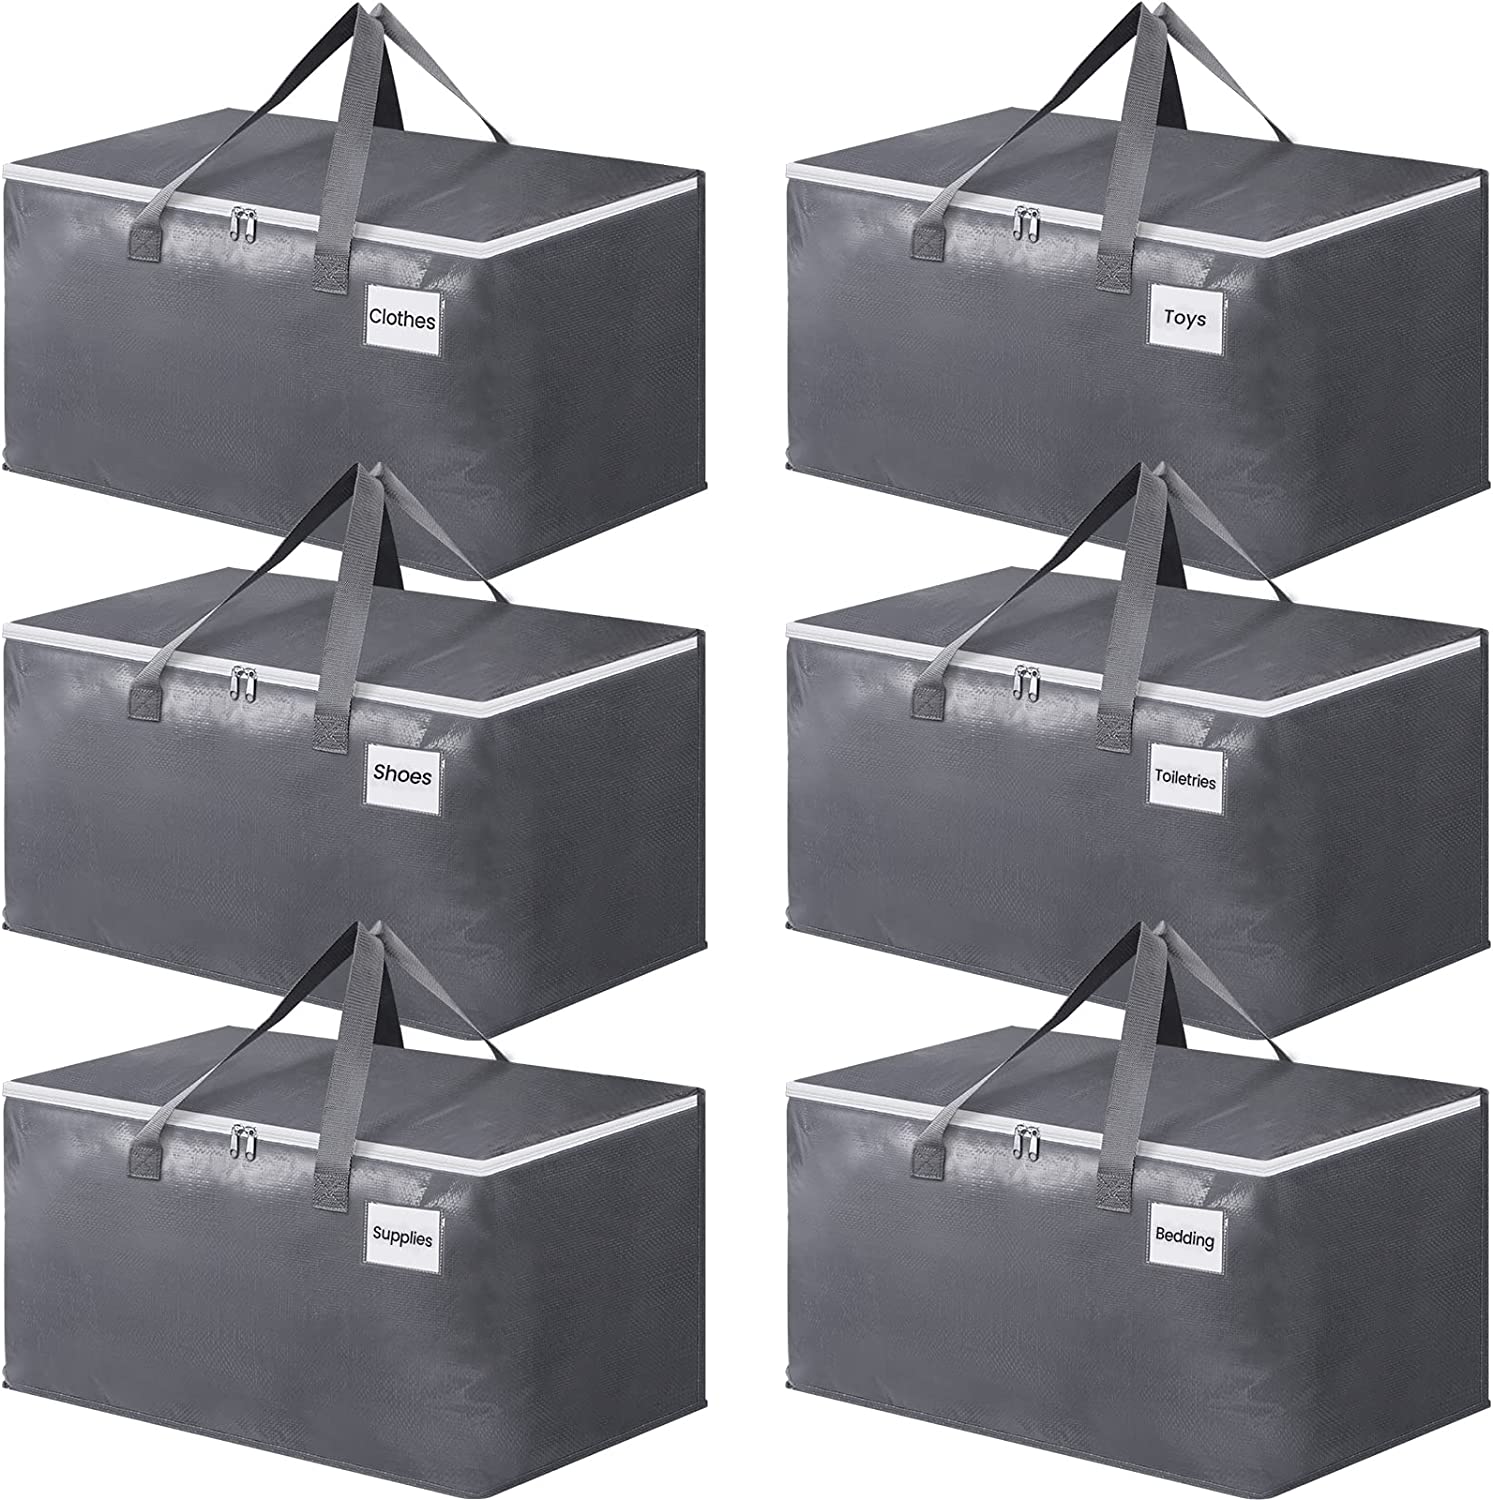 BlissTotes Large Moving Boxes with Zippers & Handles [...]